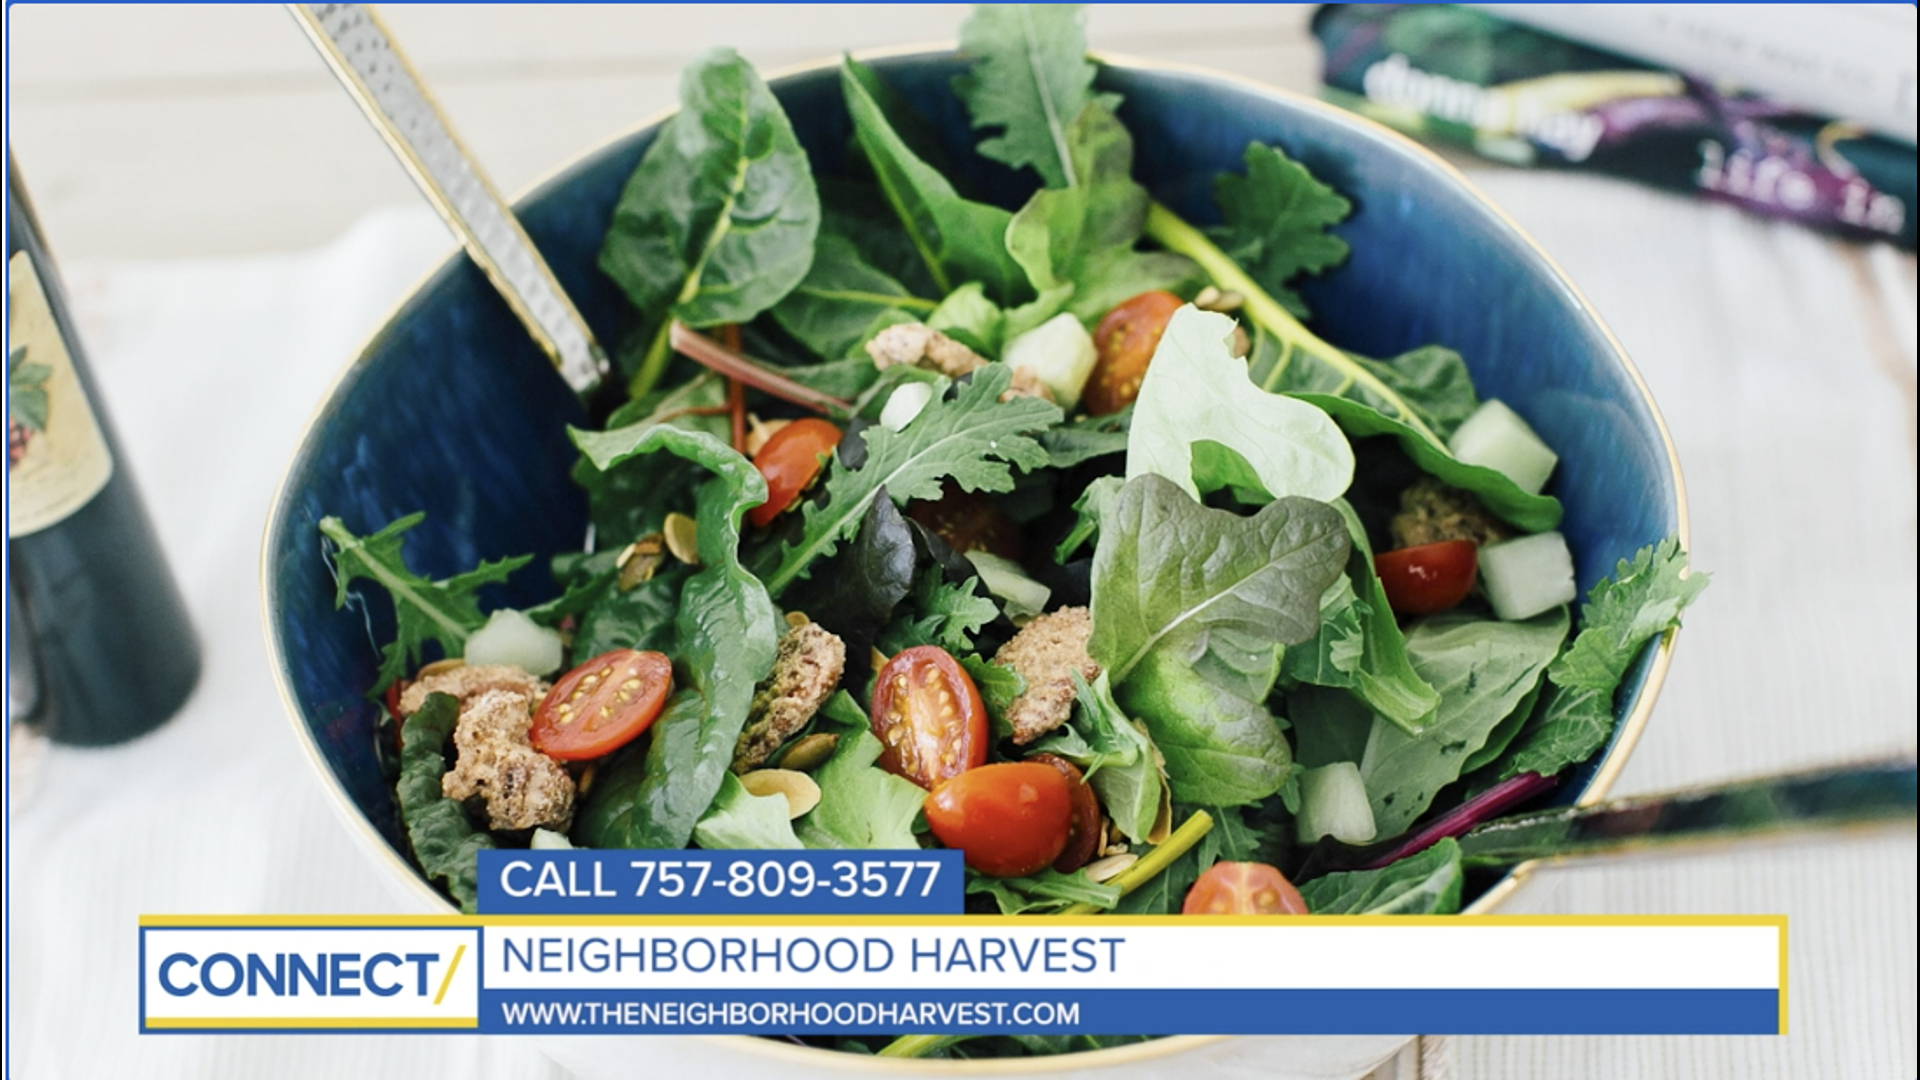 The Neighborhood Harvest delivers fresh produce from local VA farms to your doorstep! Use promo code CONNECT and sign up for free today!